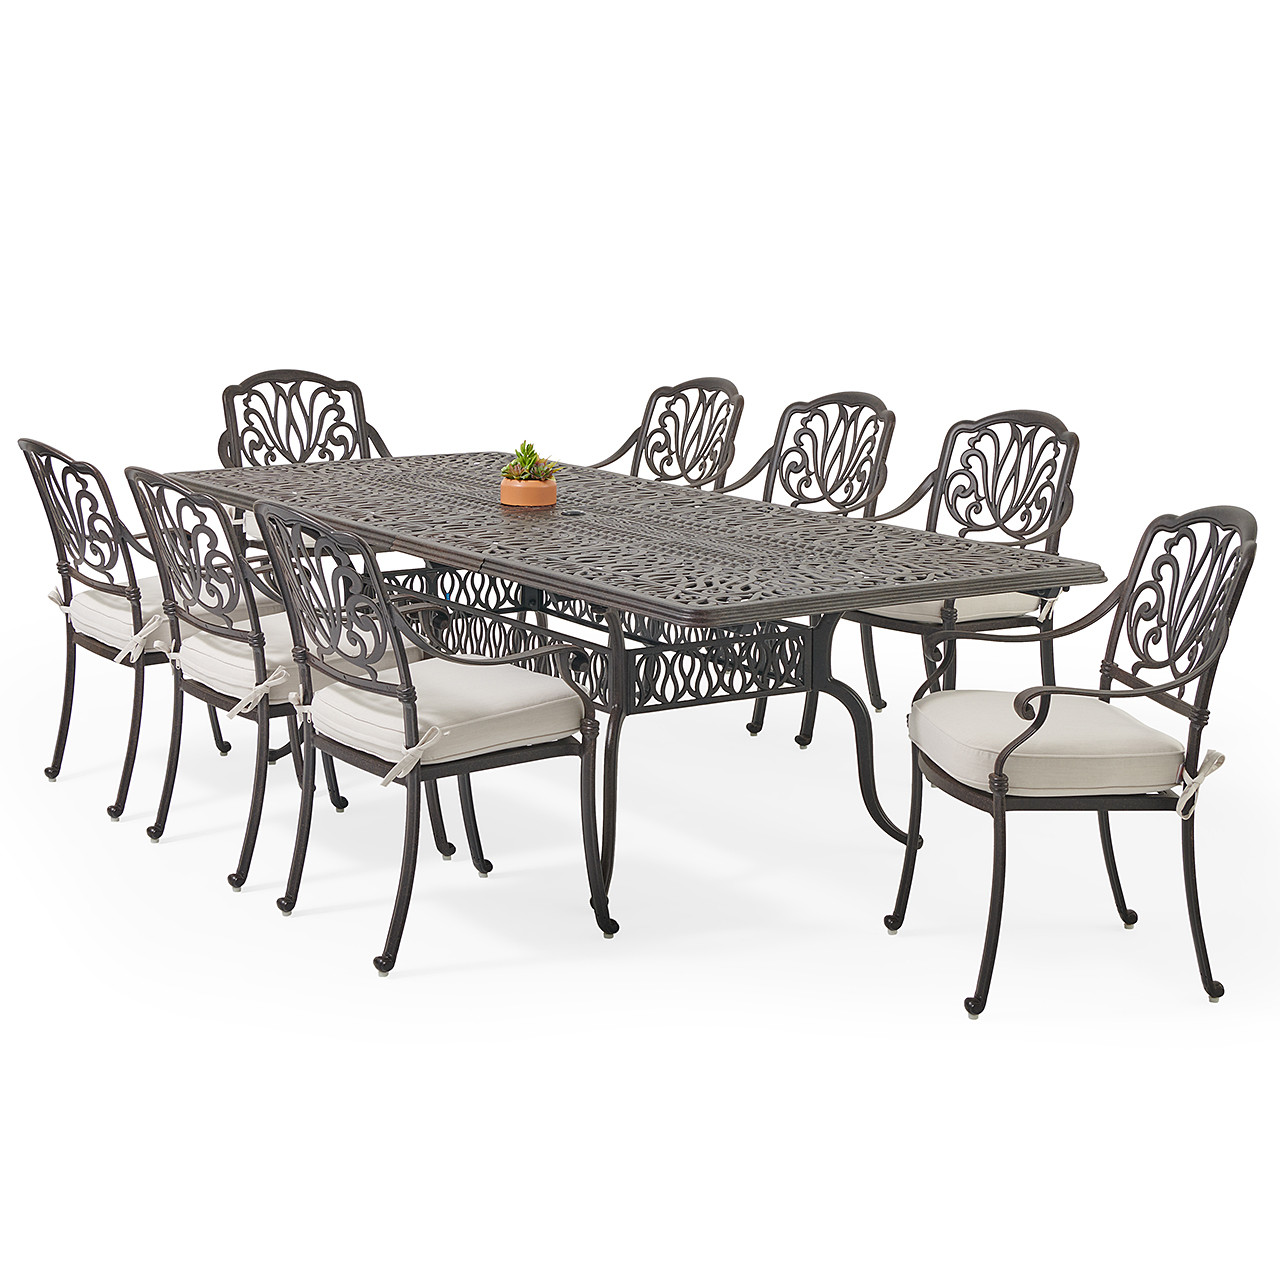 Cadiz Aged Bronze Cast Aluminum with Cushions 9 Pc. Dining Set + 71-103 x 44 in. Double Extension Table